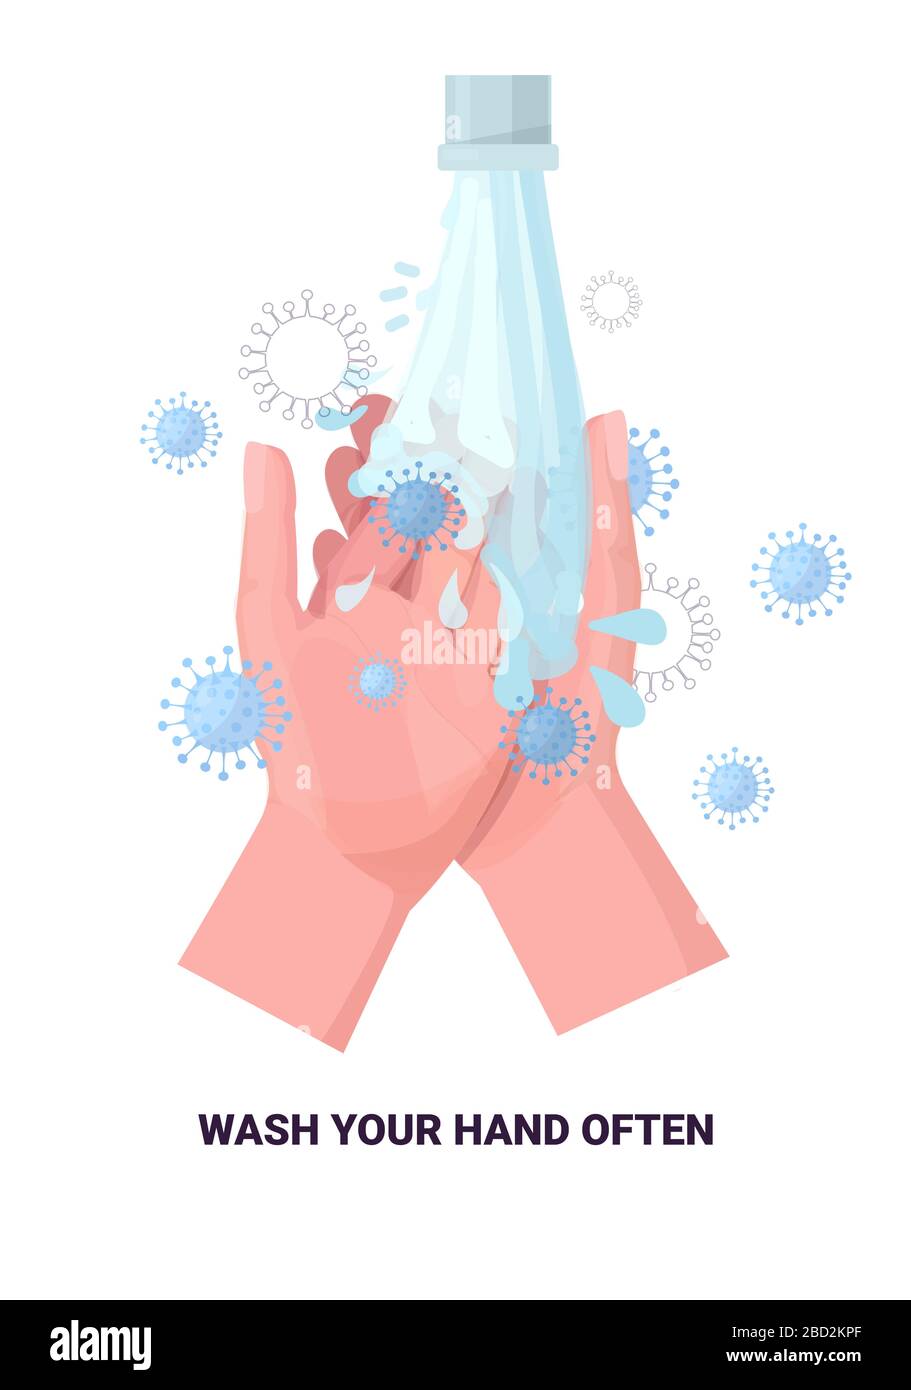 coronavirus protection concept wash your hands often protect yourself prevent covid 19 vertical isolated vector illustration Stock Vector